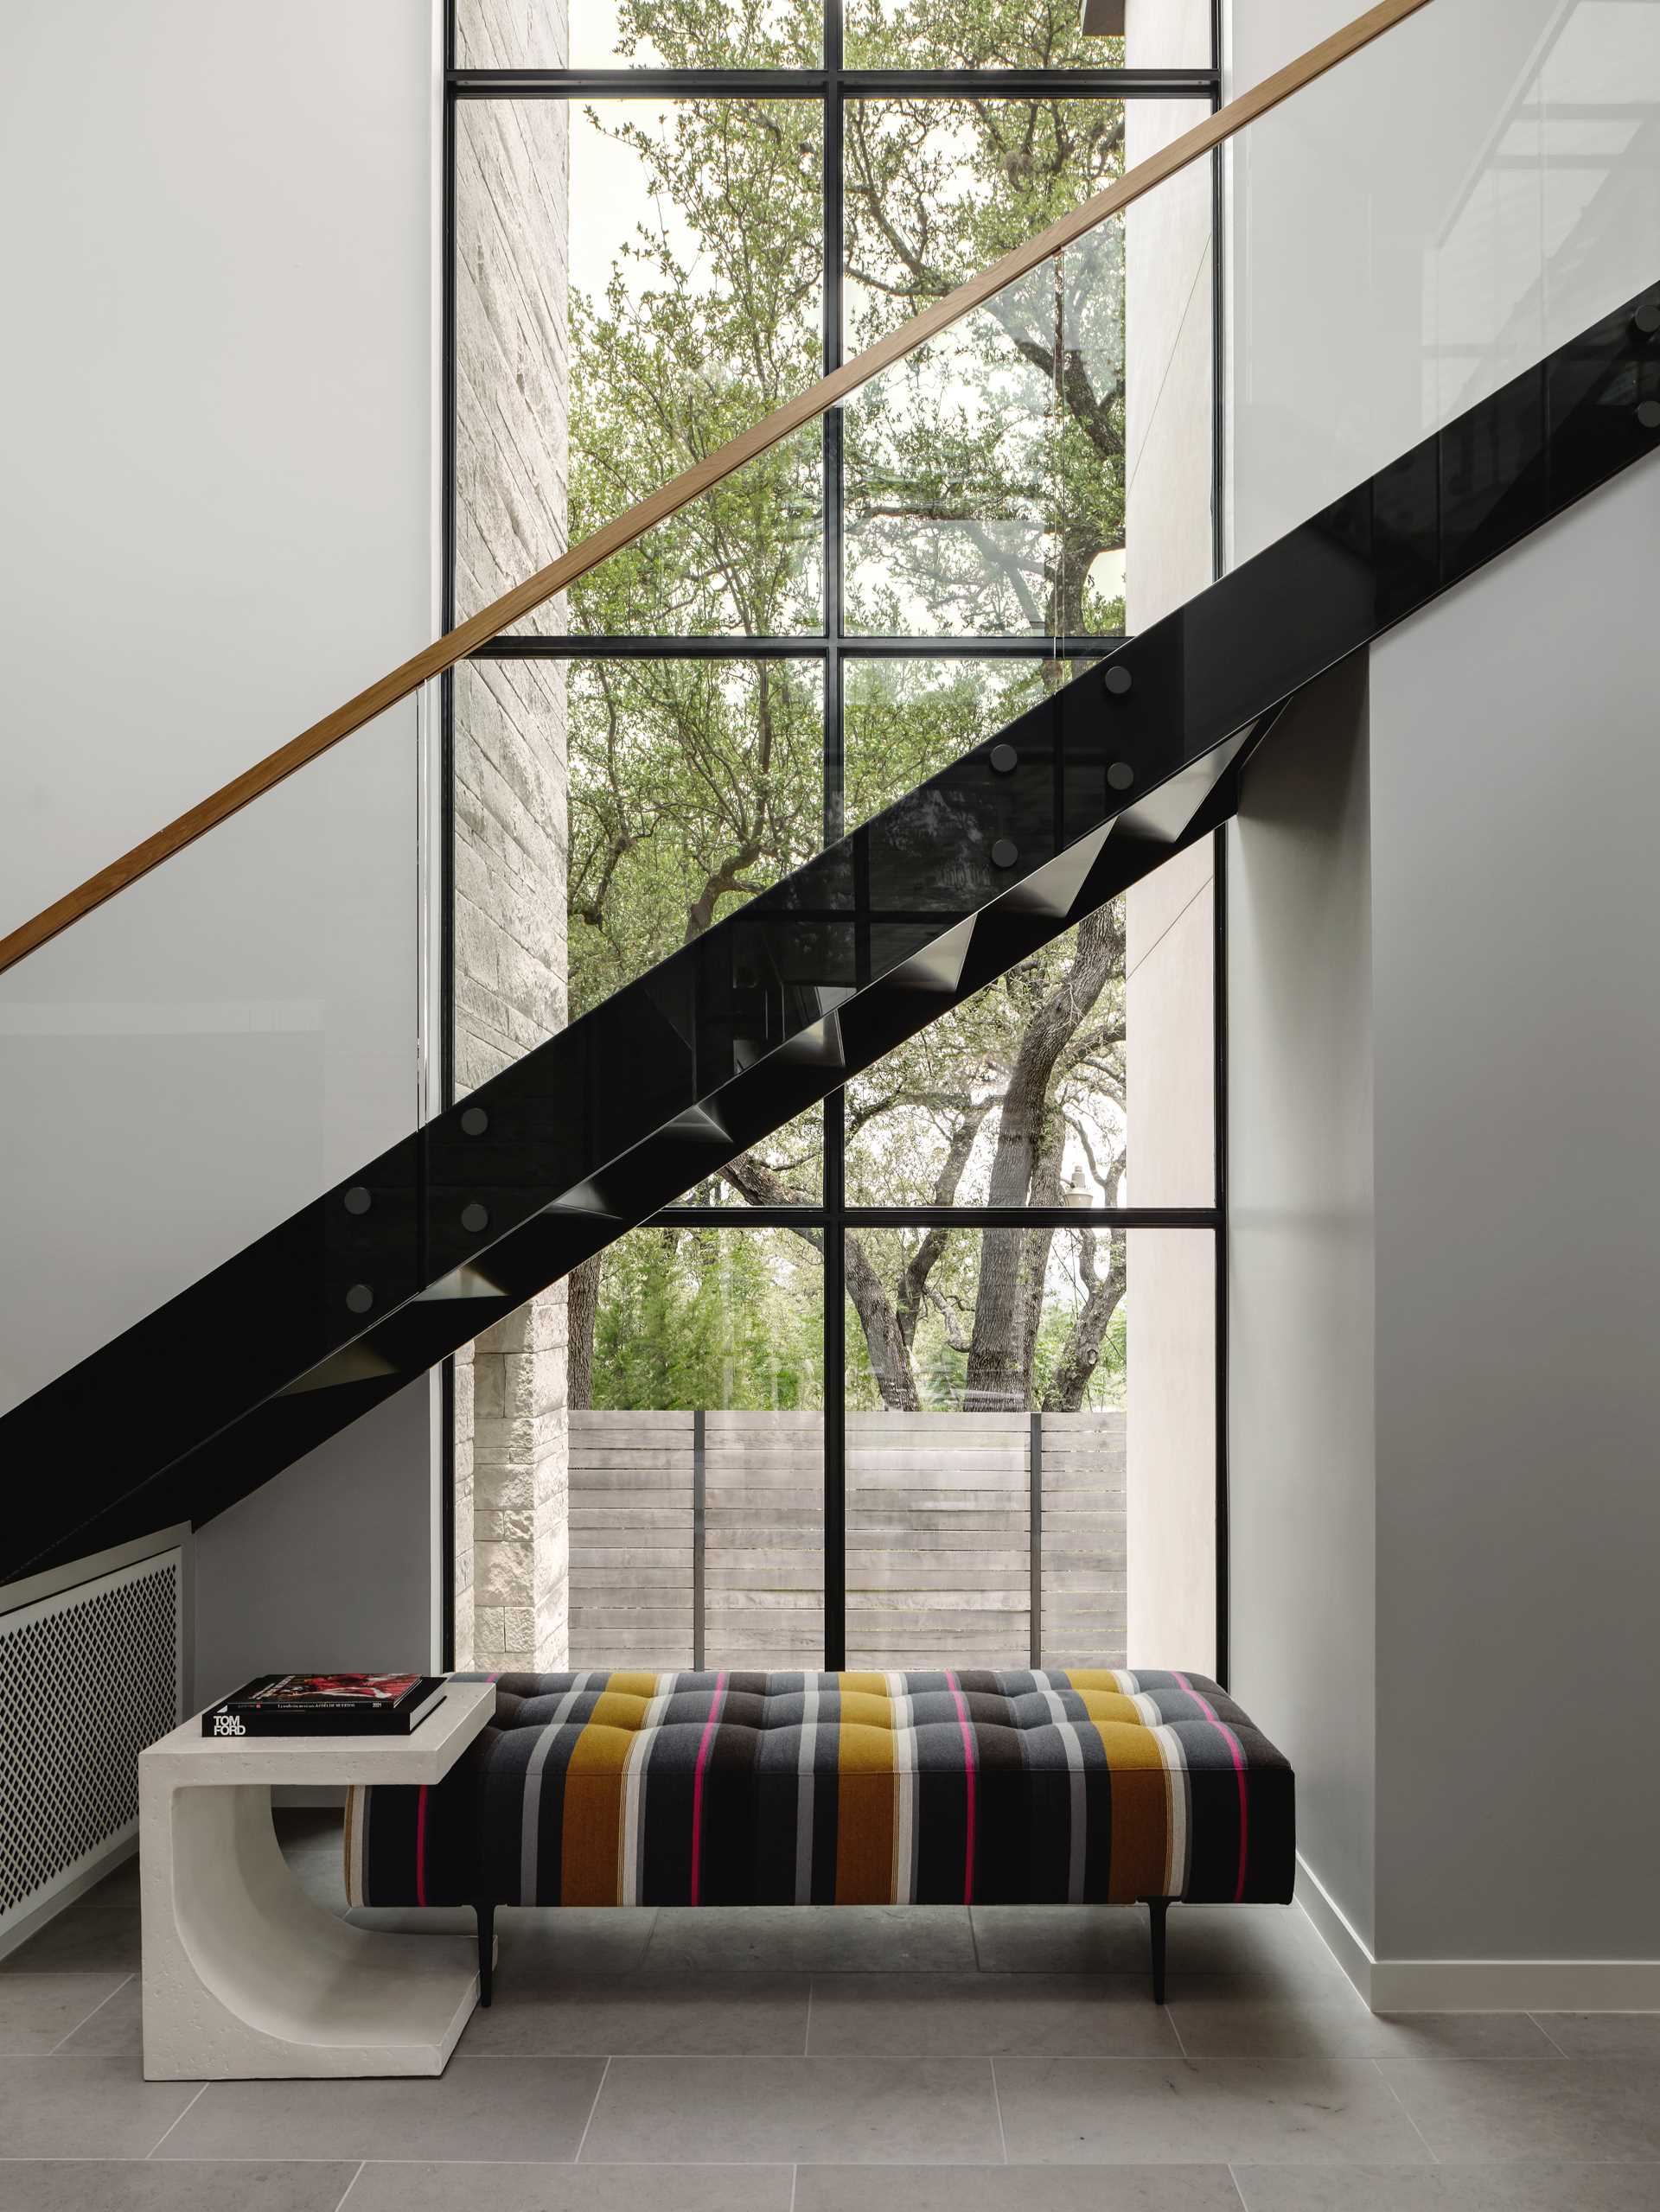 Metal and wood stairs connect the various levels of the home, while a seating area has been added underneath.